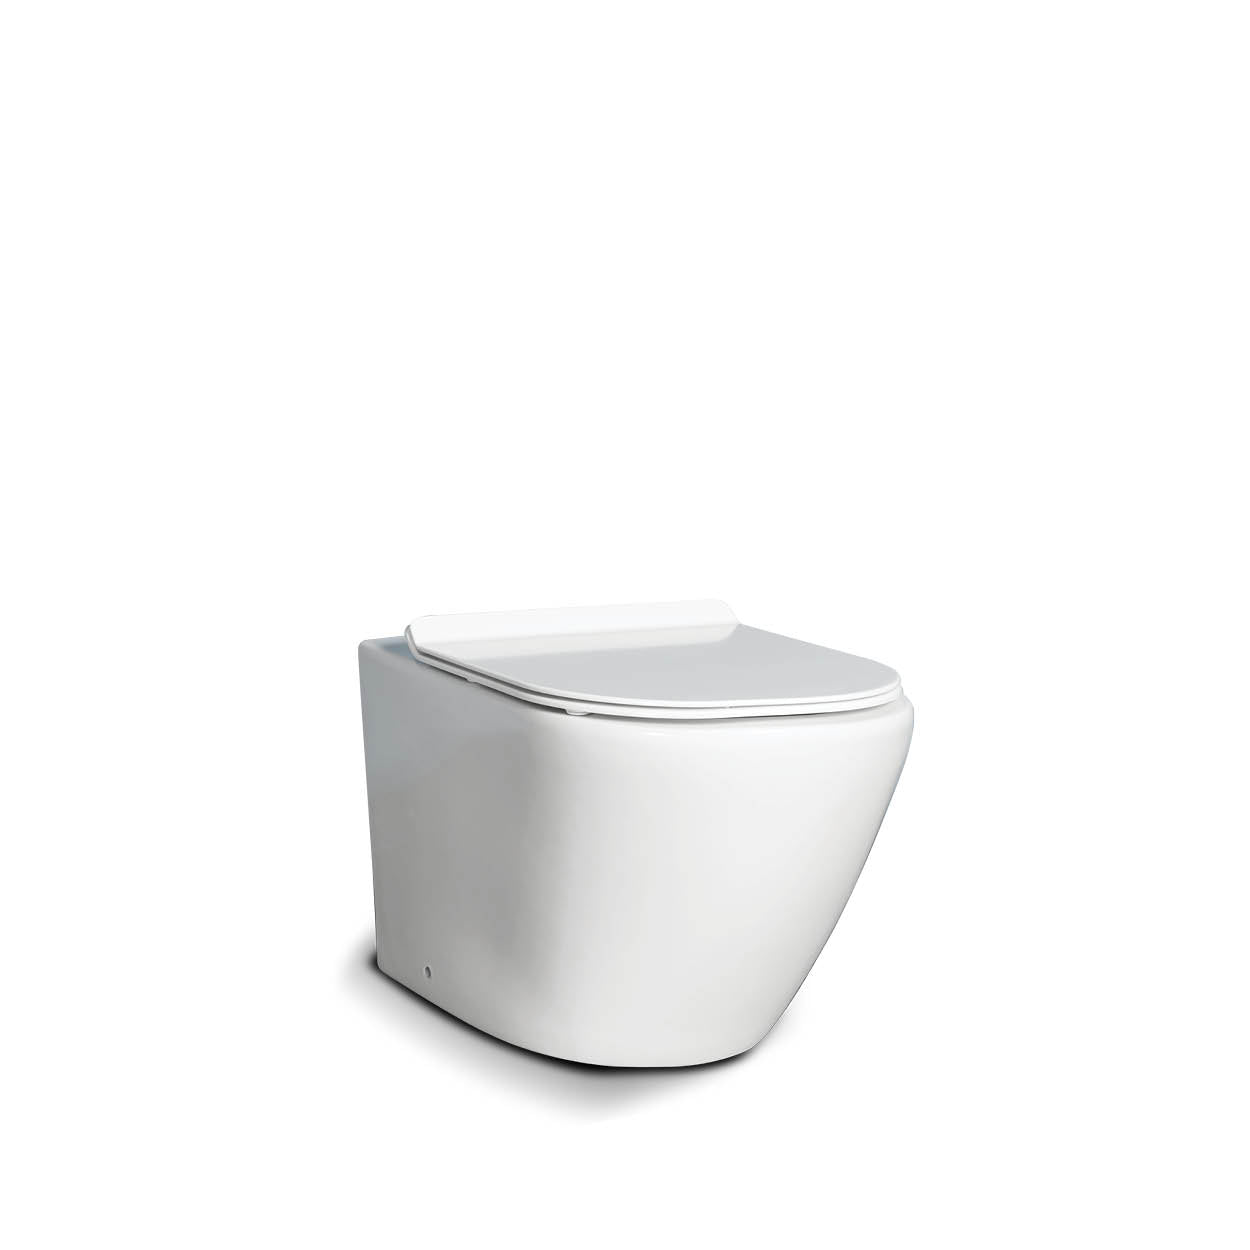 The Hillier Rimless Wall-Hung Toilet